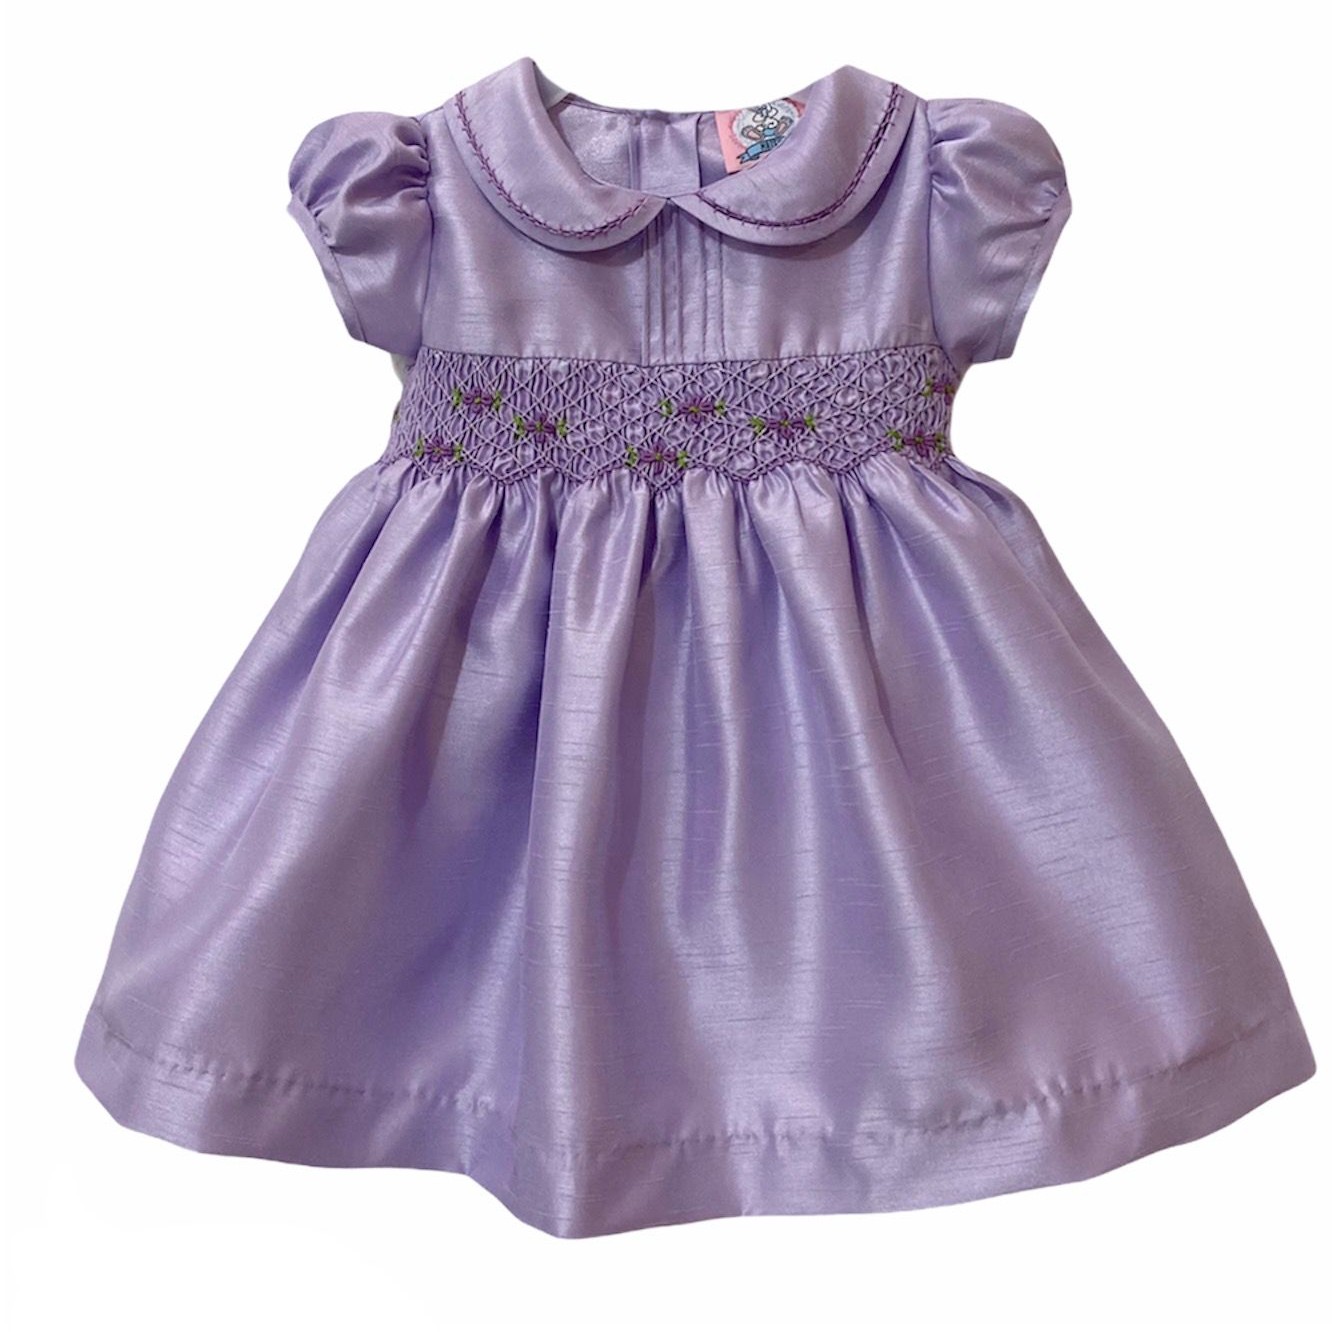 Girl's Dress with Hand Embroidery - Lilac Color with Purple Floral Embroidery